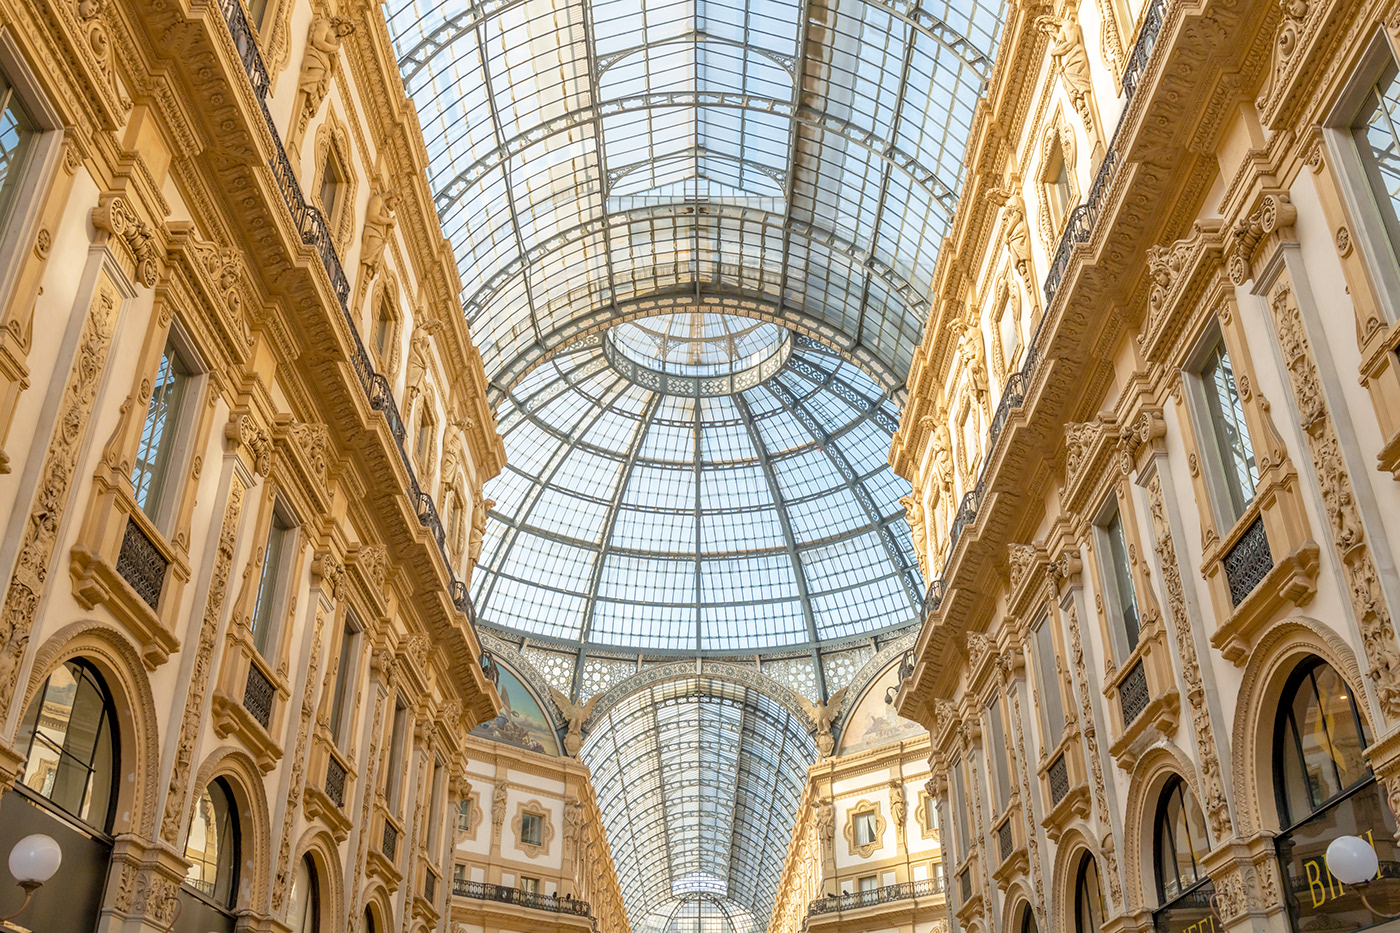 Galleria Vittorio Emanuele II in Milan is Italy's oldest and continuous shopping center.